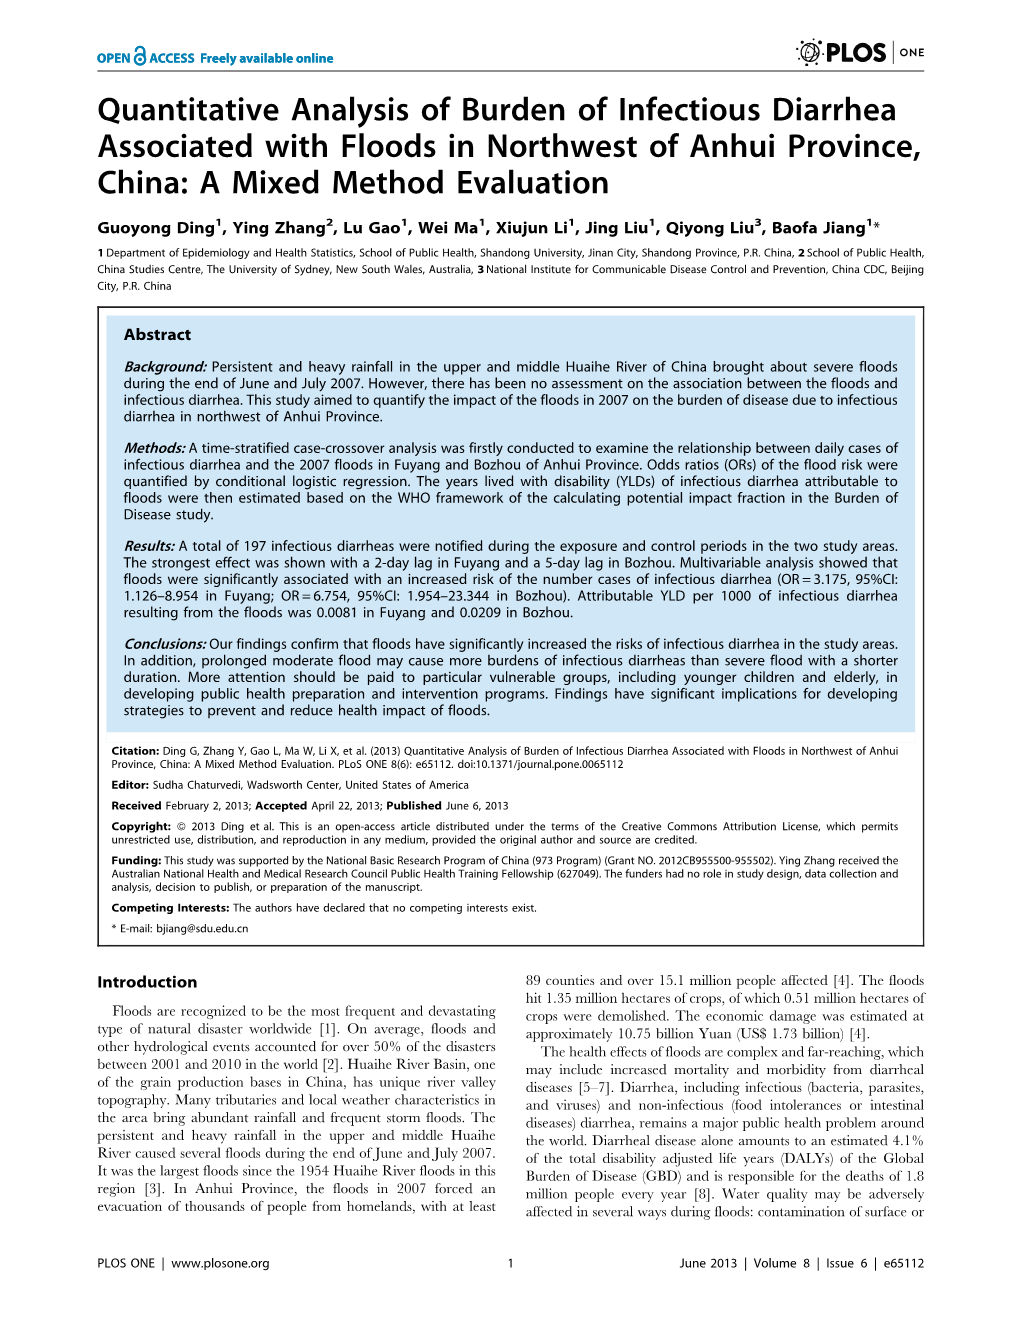 Quantitative Analysis of Burden of Infectious Diarrhea Associated with Floods in Northwest of Anhui Province, China: a Mixed Method Evaluation